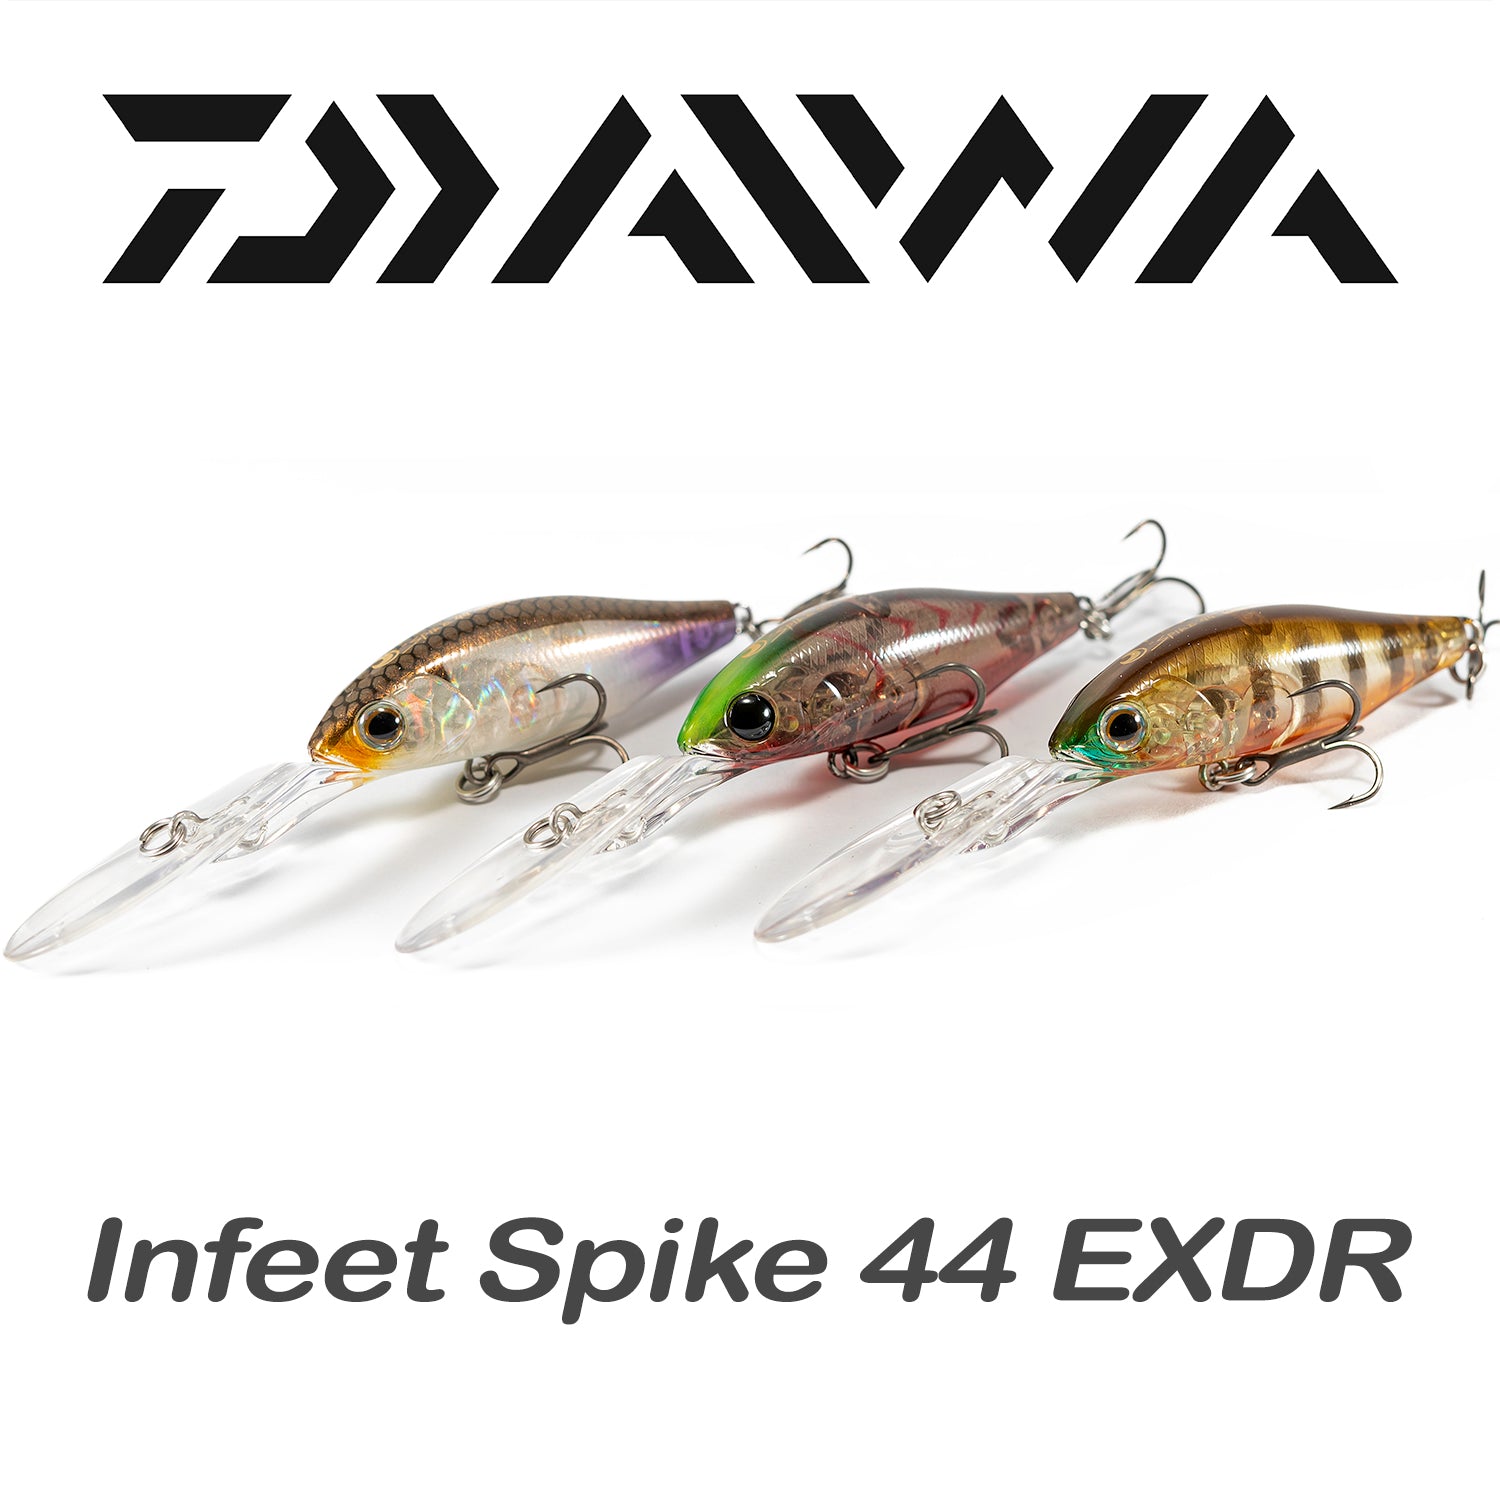 Daiwa Infeet Spike 44 EXDR - Compleat Angler Nedlands Pro Tackle